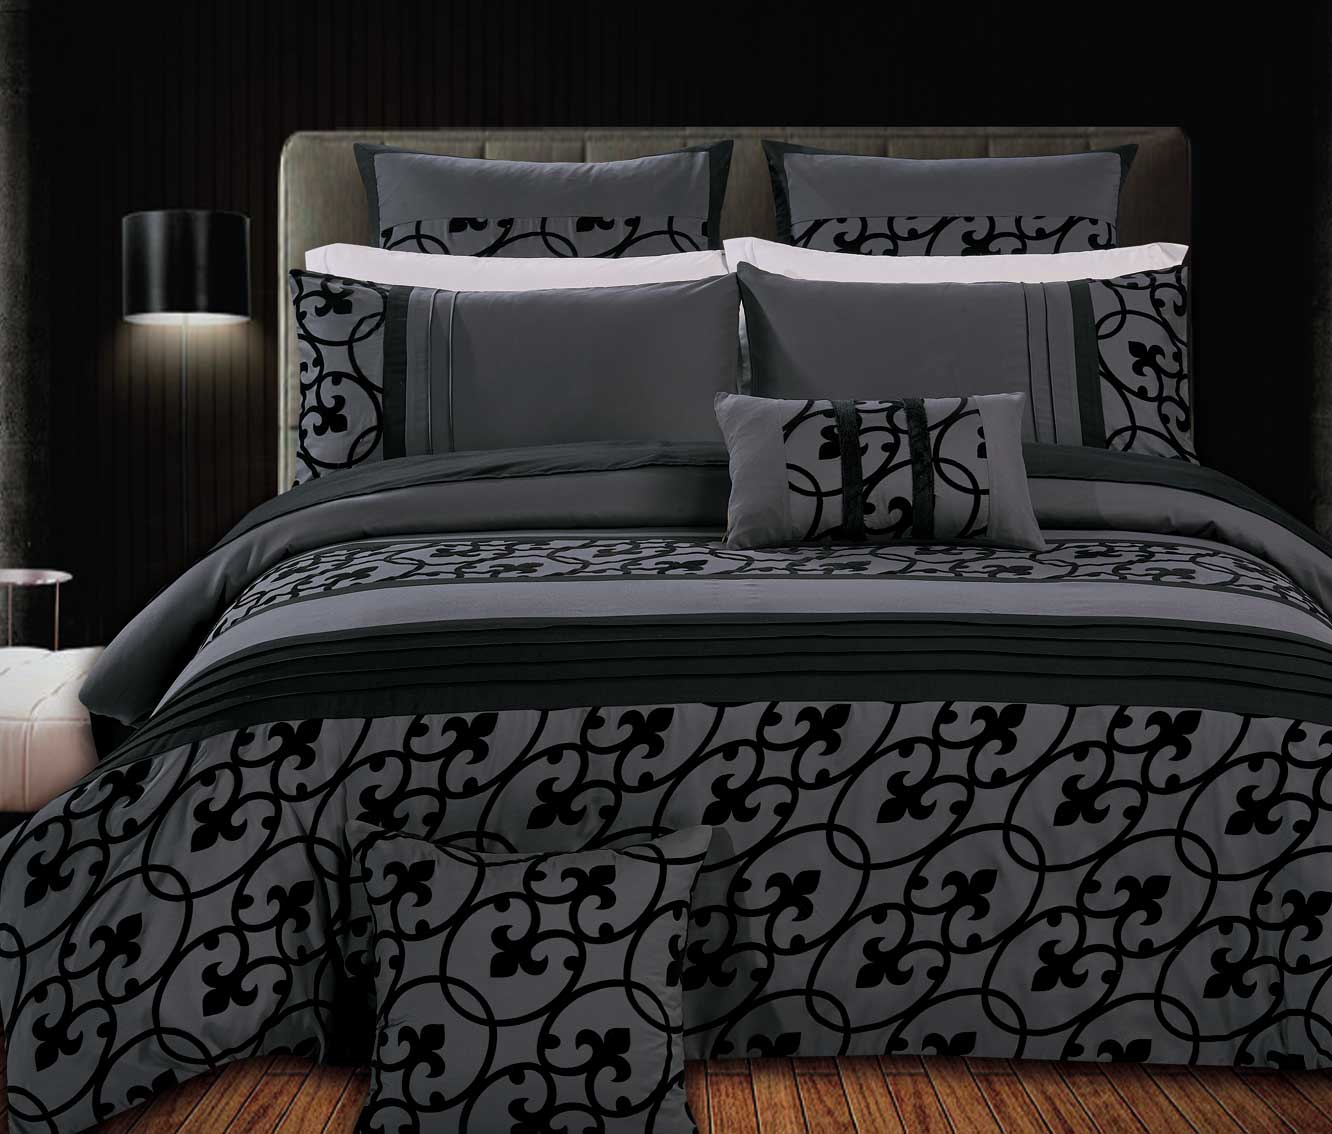 Super king size Scroll Floral 3pcs Grey and Black Quilt Cover Set